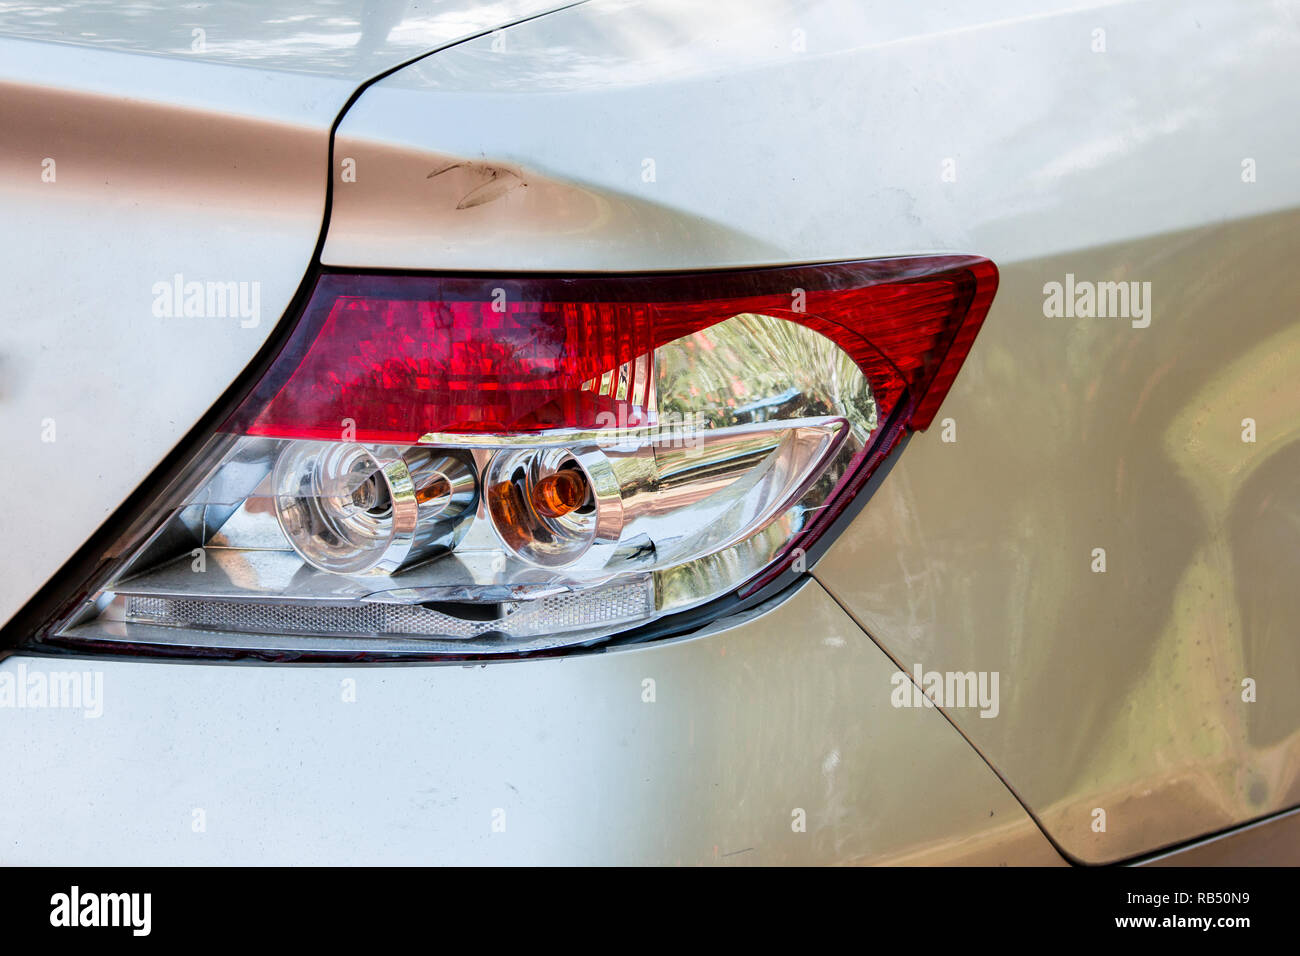 Automobile , rear car lights Cracked from accident. Stock Photo